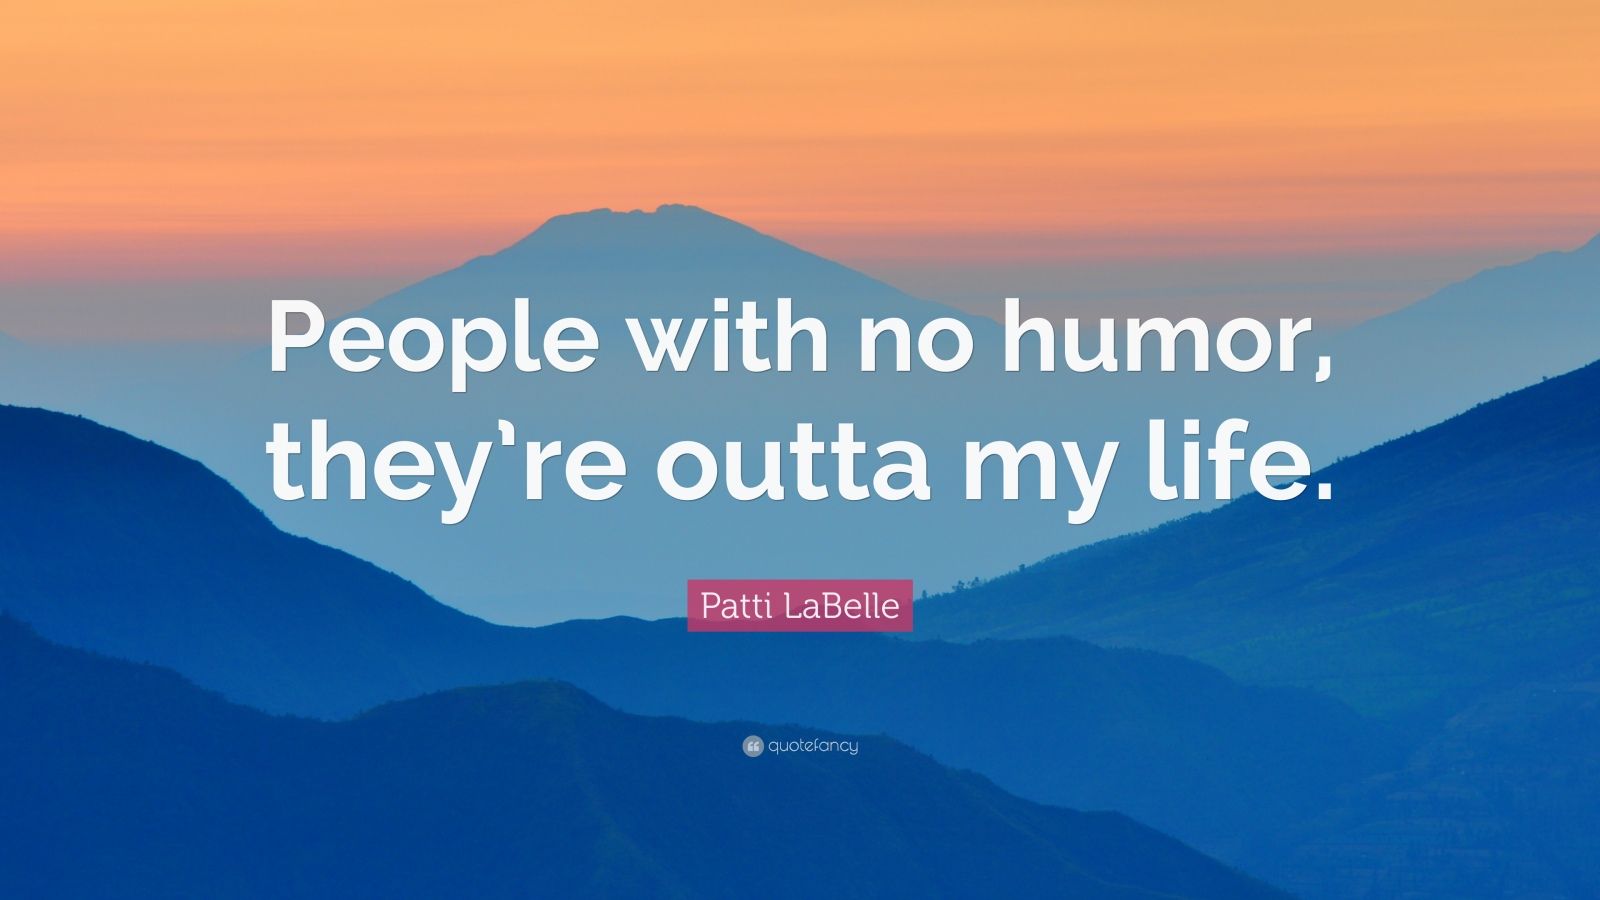 Patti LaBelle Quote: “People with no humor, they’re outta my life.” (7 ...